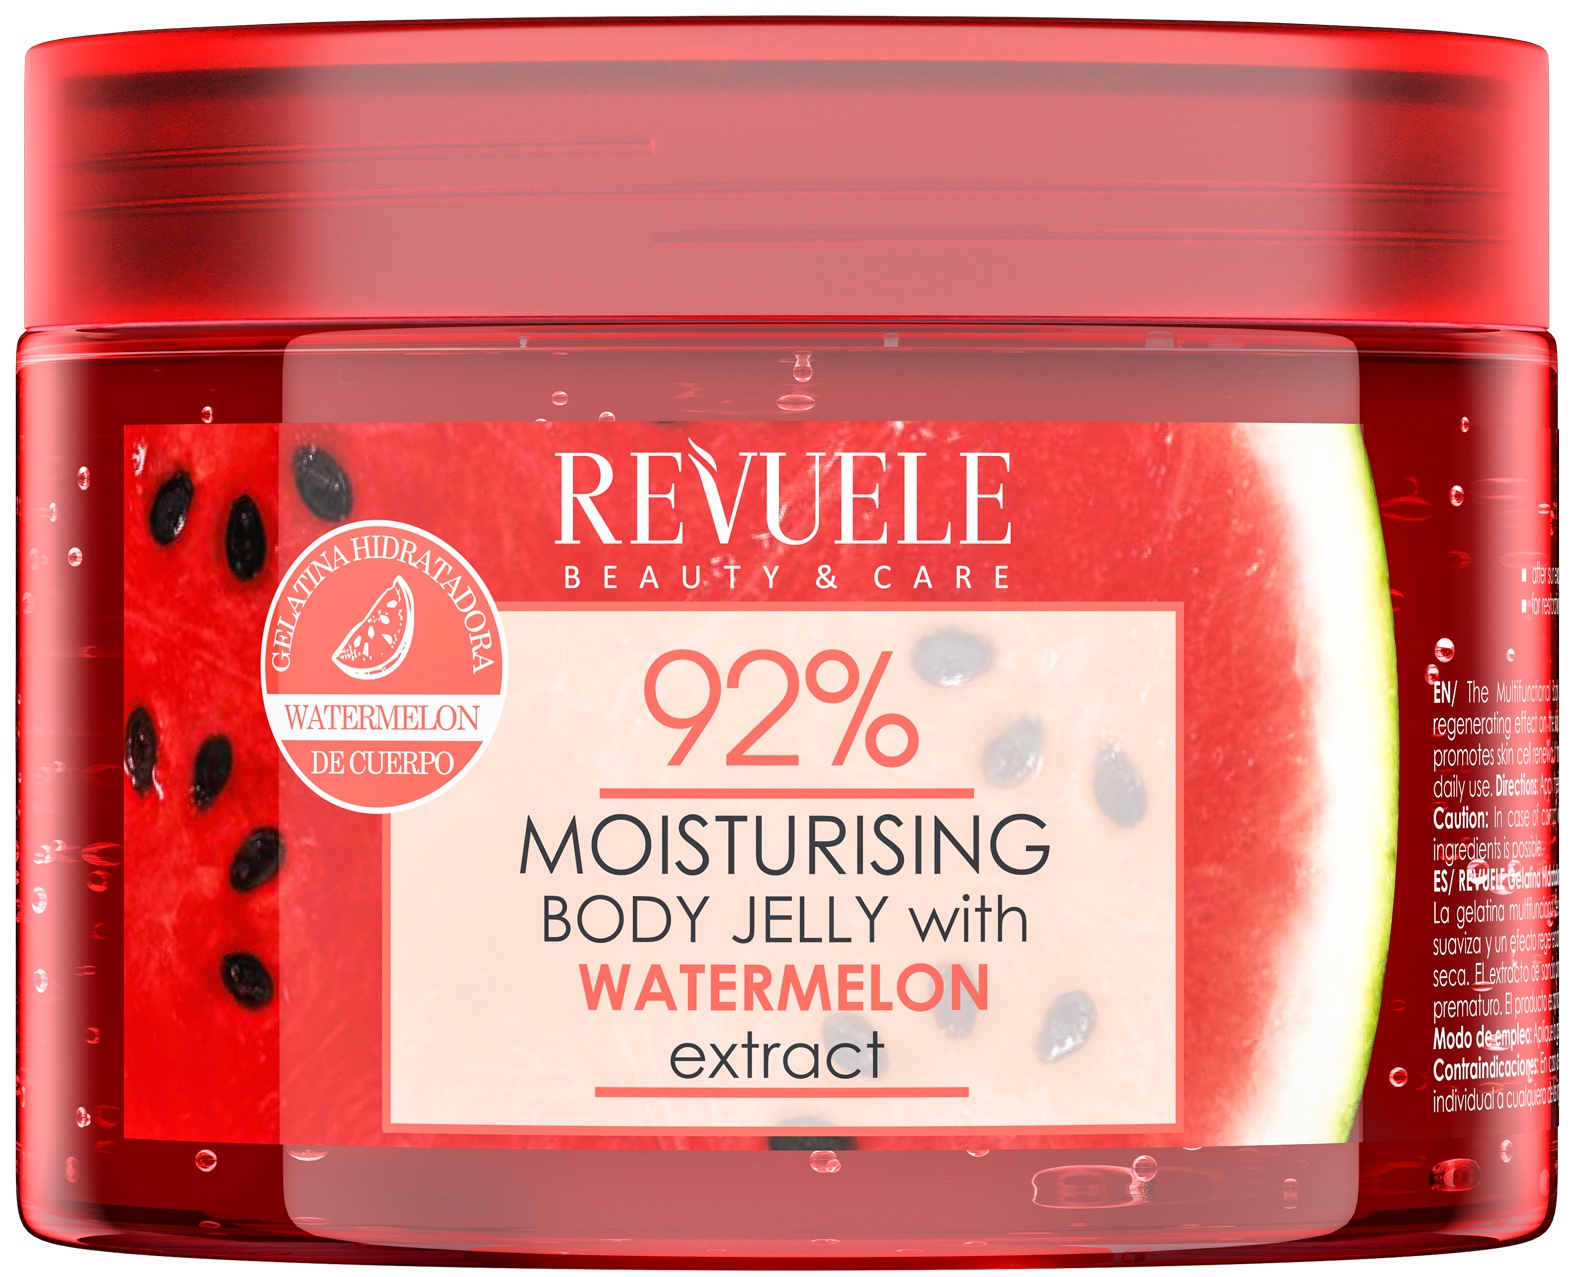 Revuele Moisturising Body Jelly With Watermelon Extract